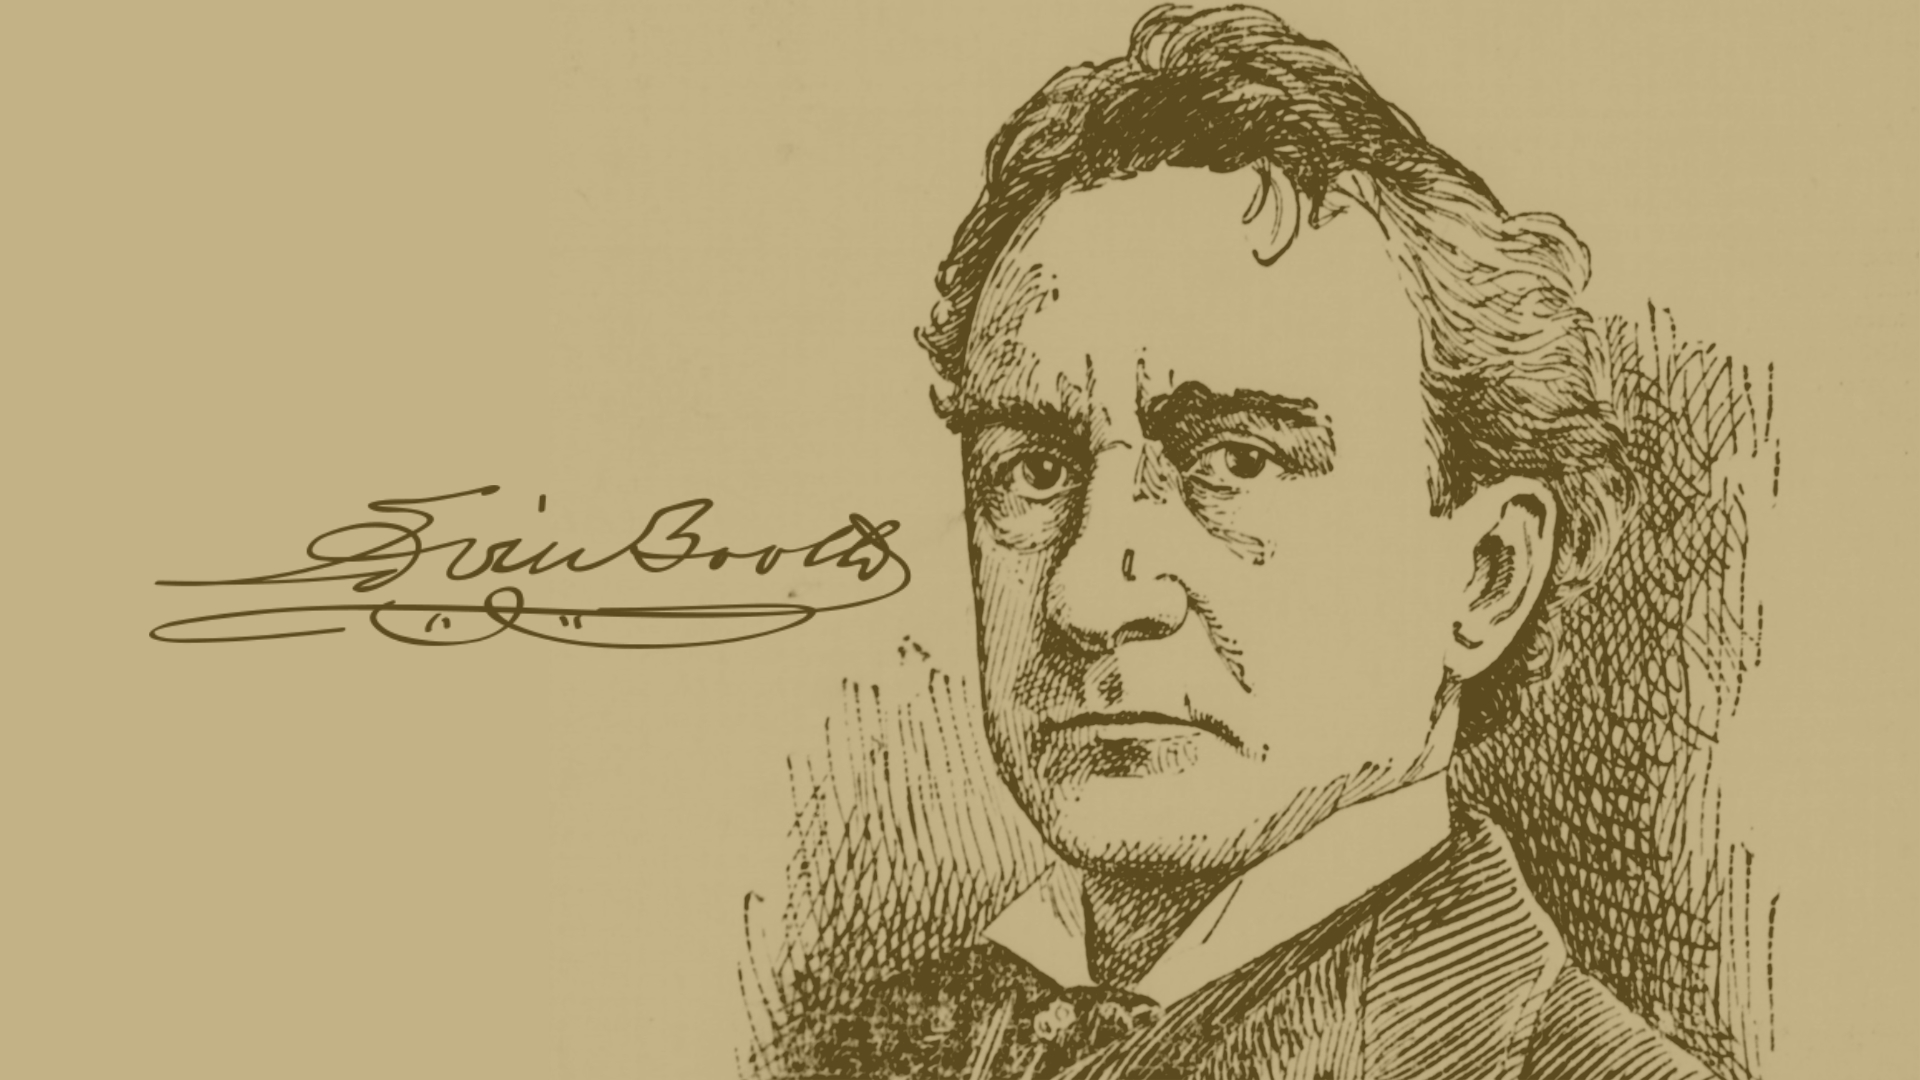 Edwin Booth portrait with signature